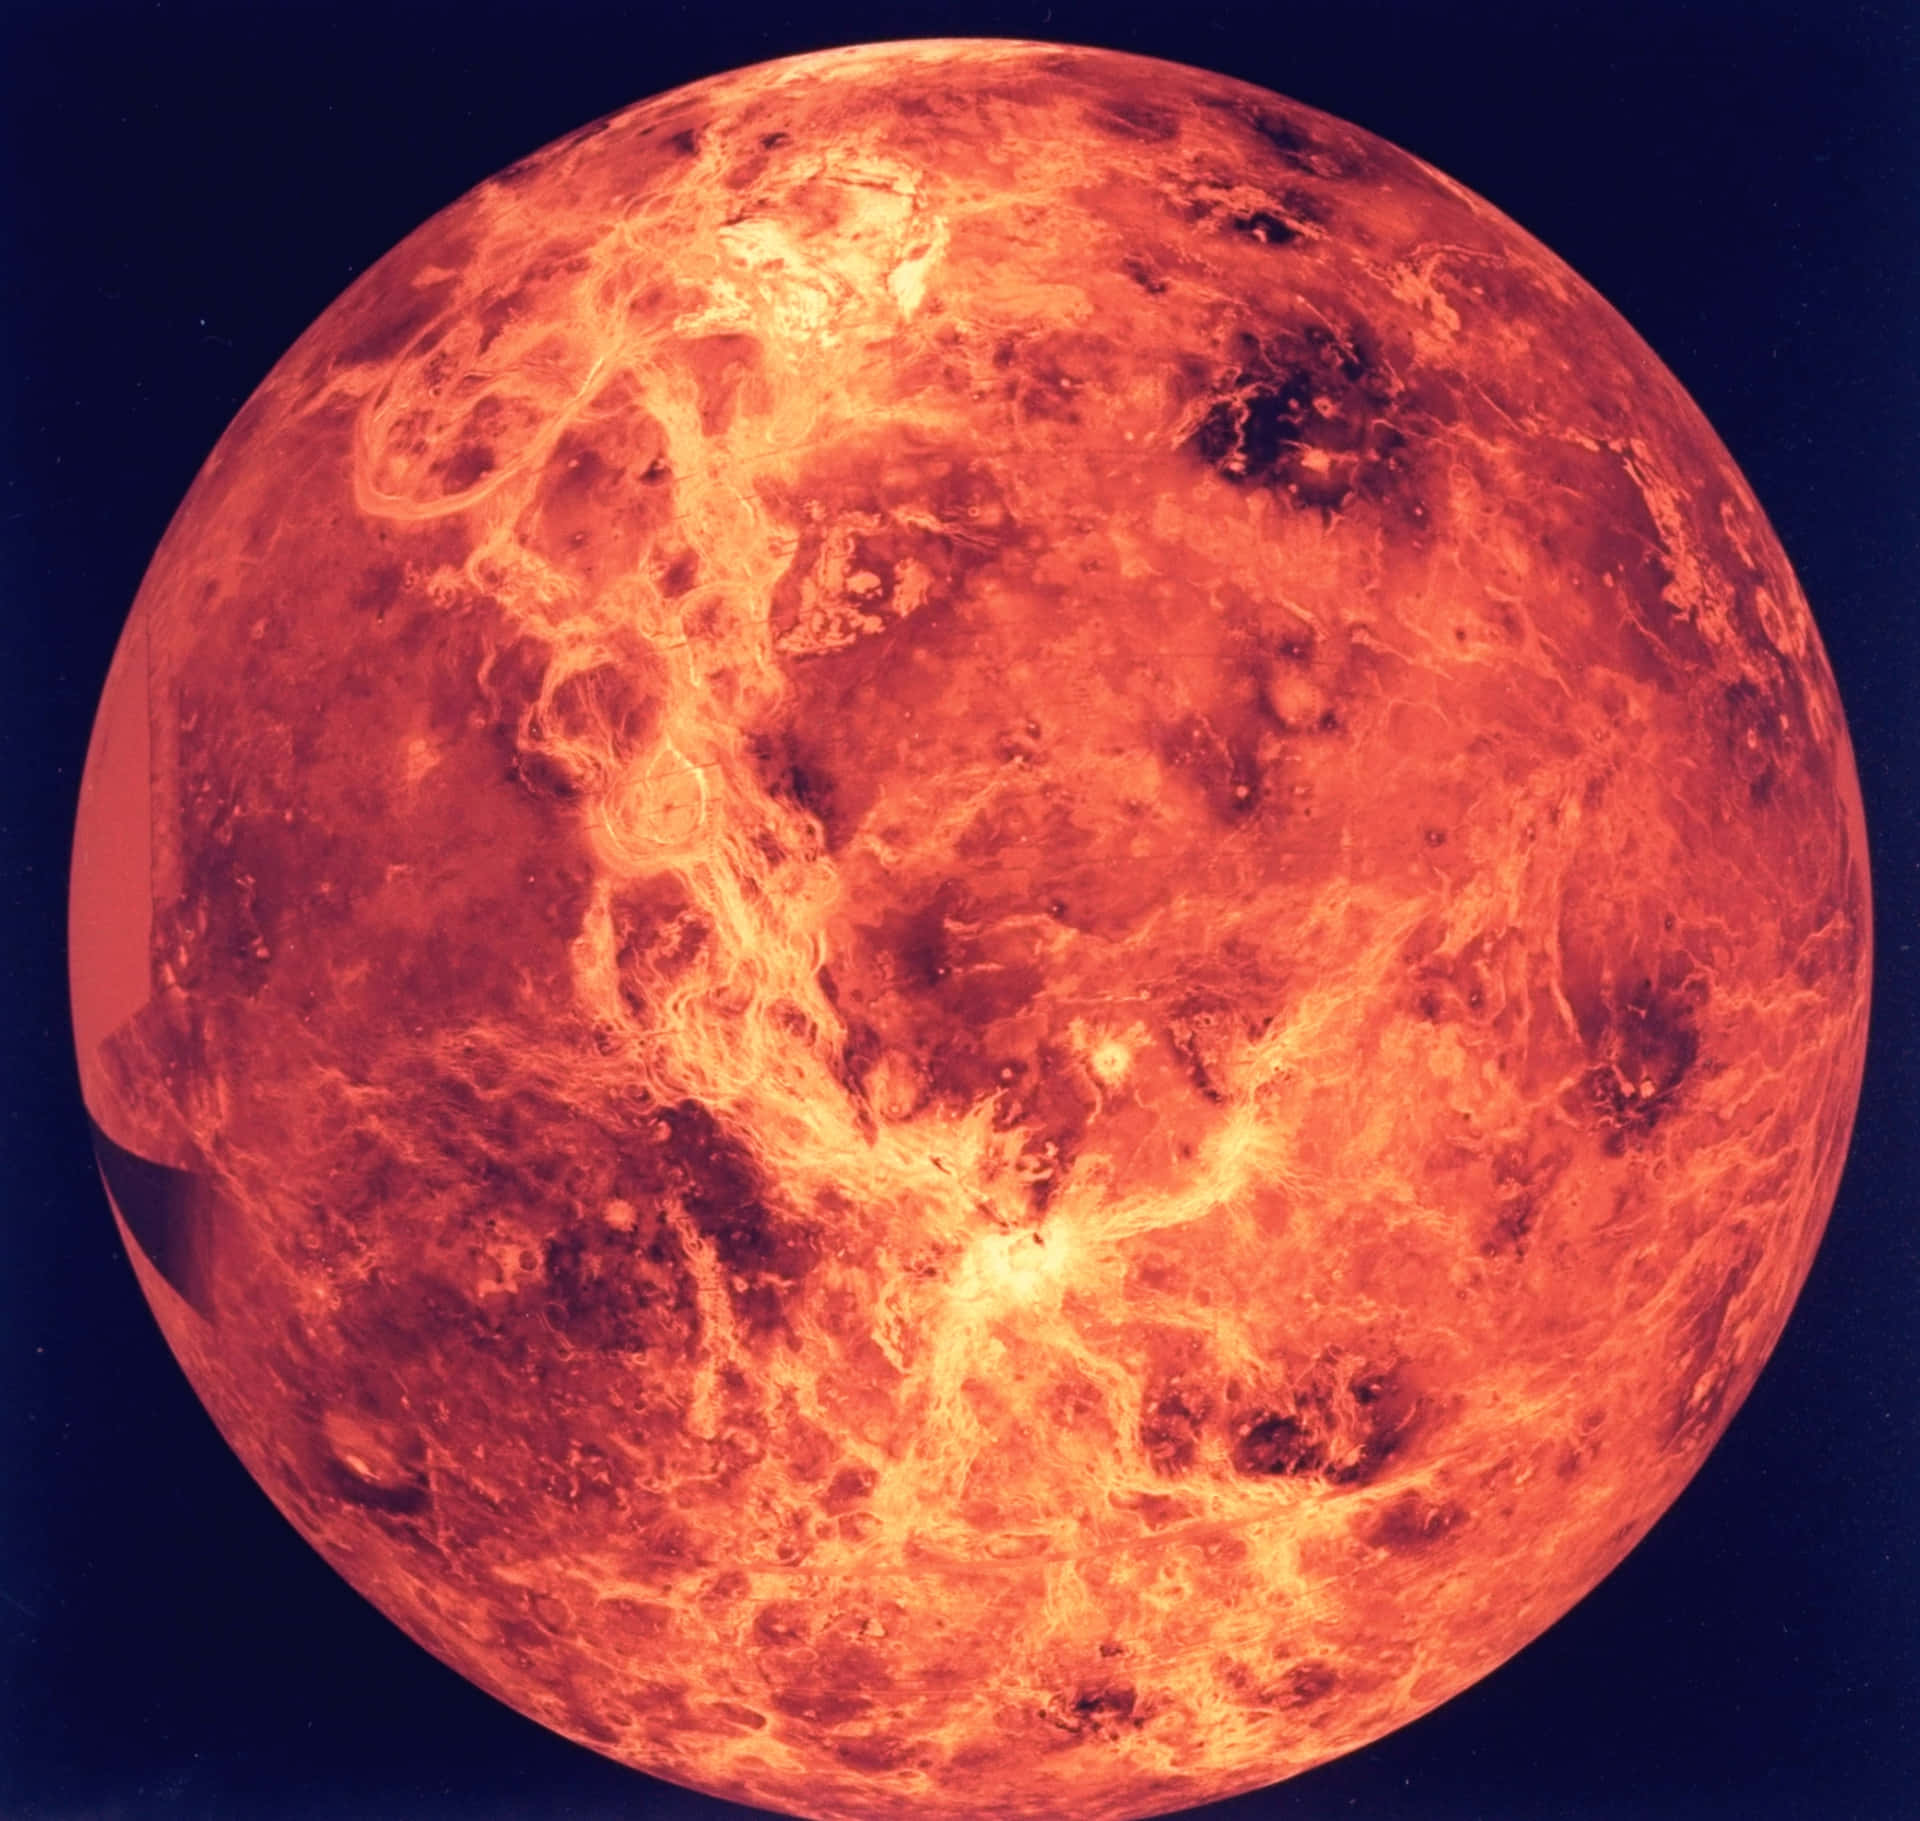 A view of the planet Venus.